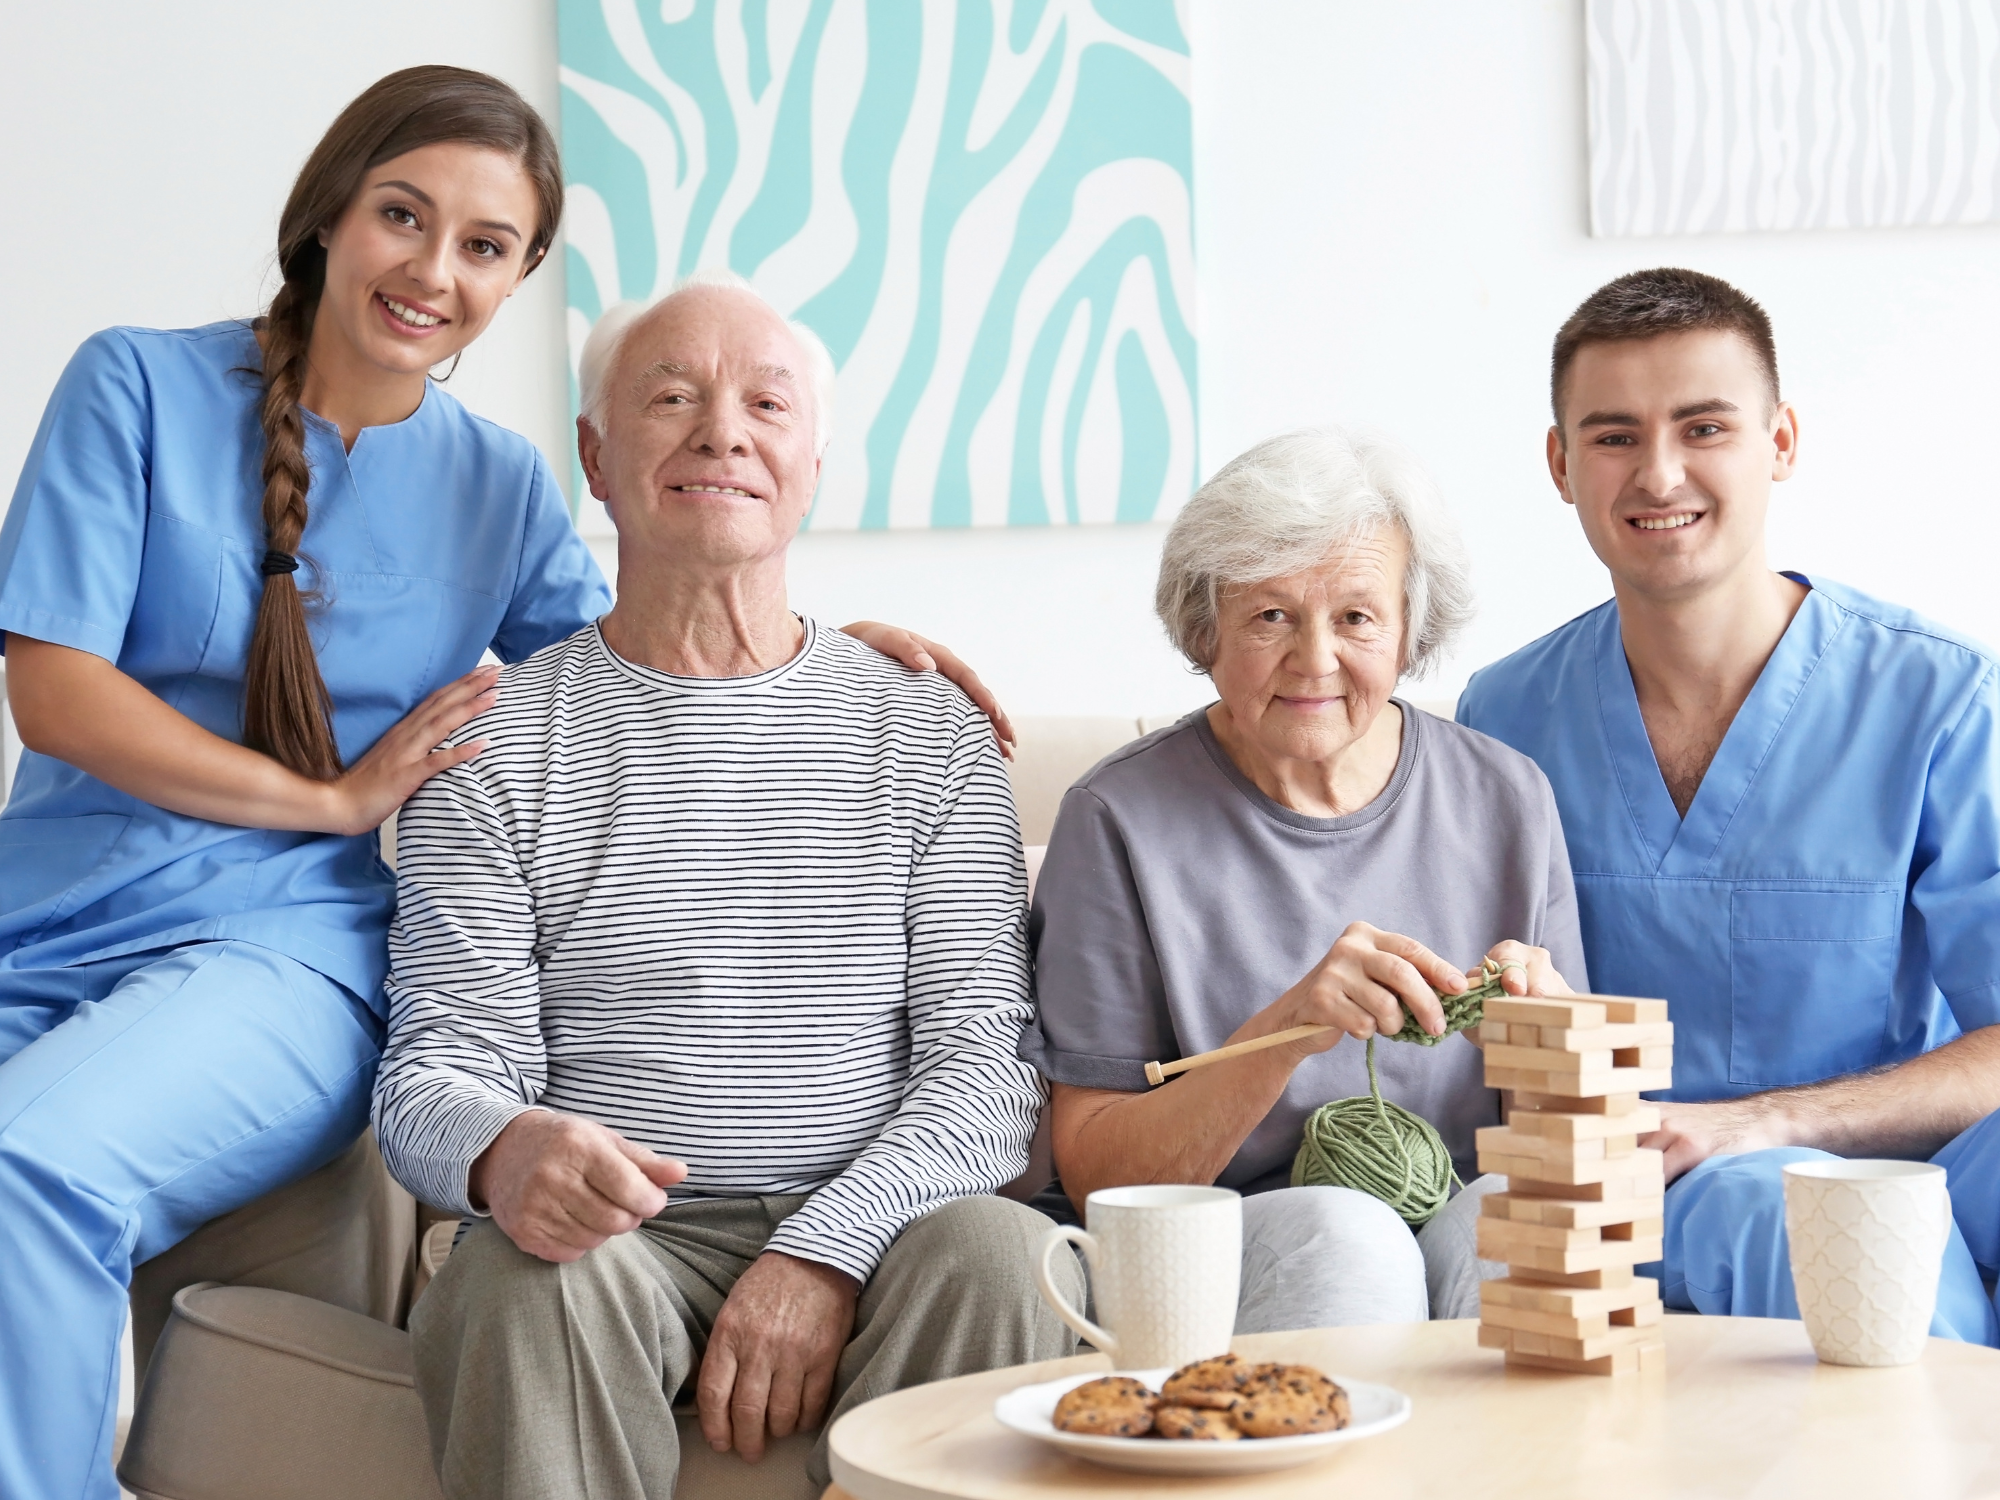 10 Steps to Finding the Right Home Care Agency